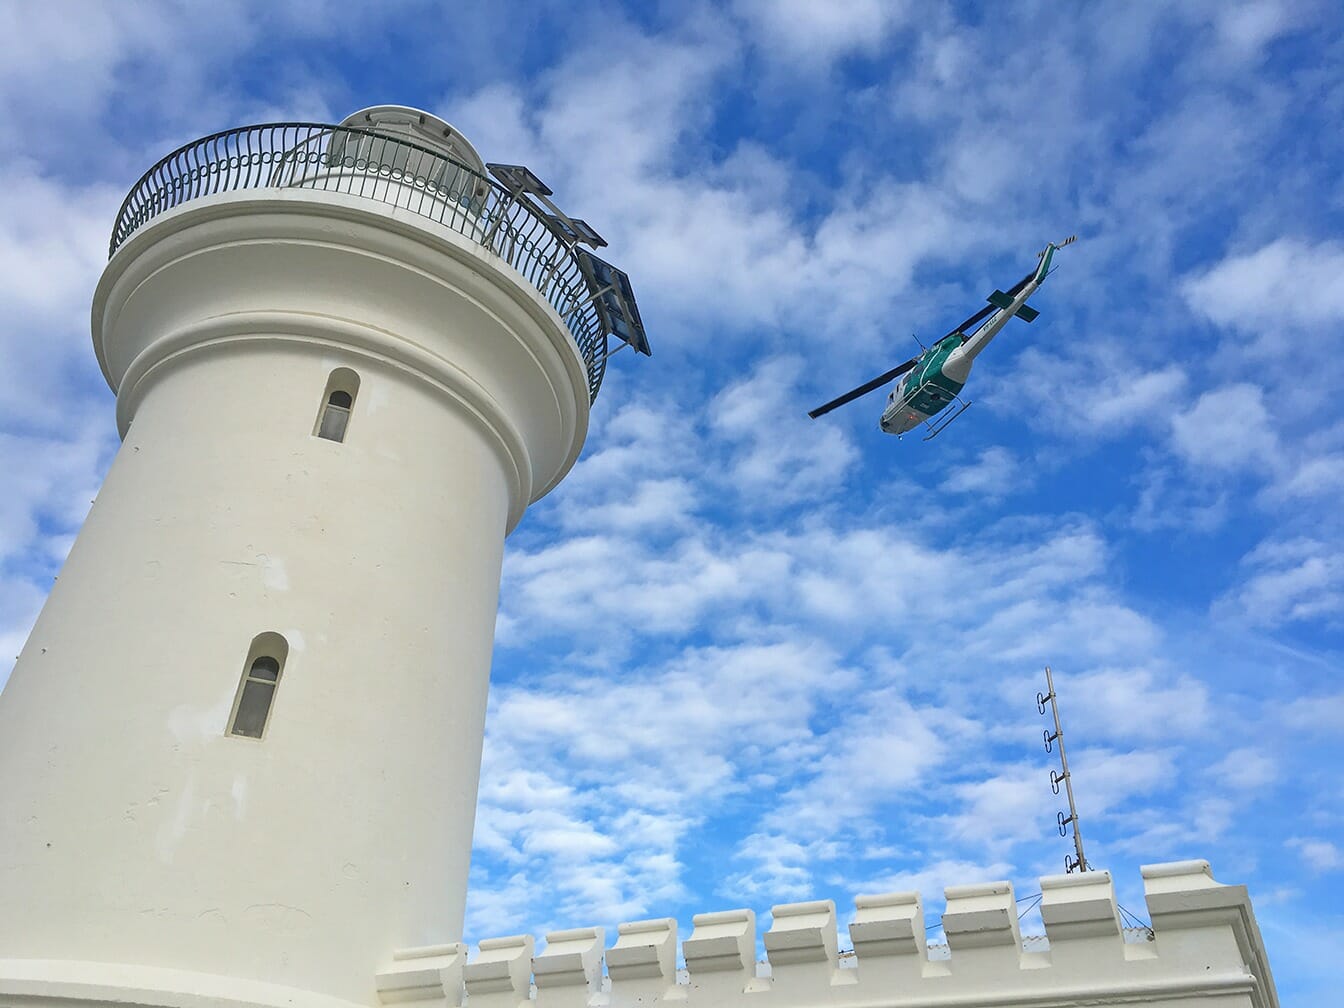 lighthouse with a helicopter in the background